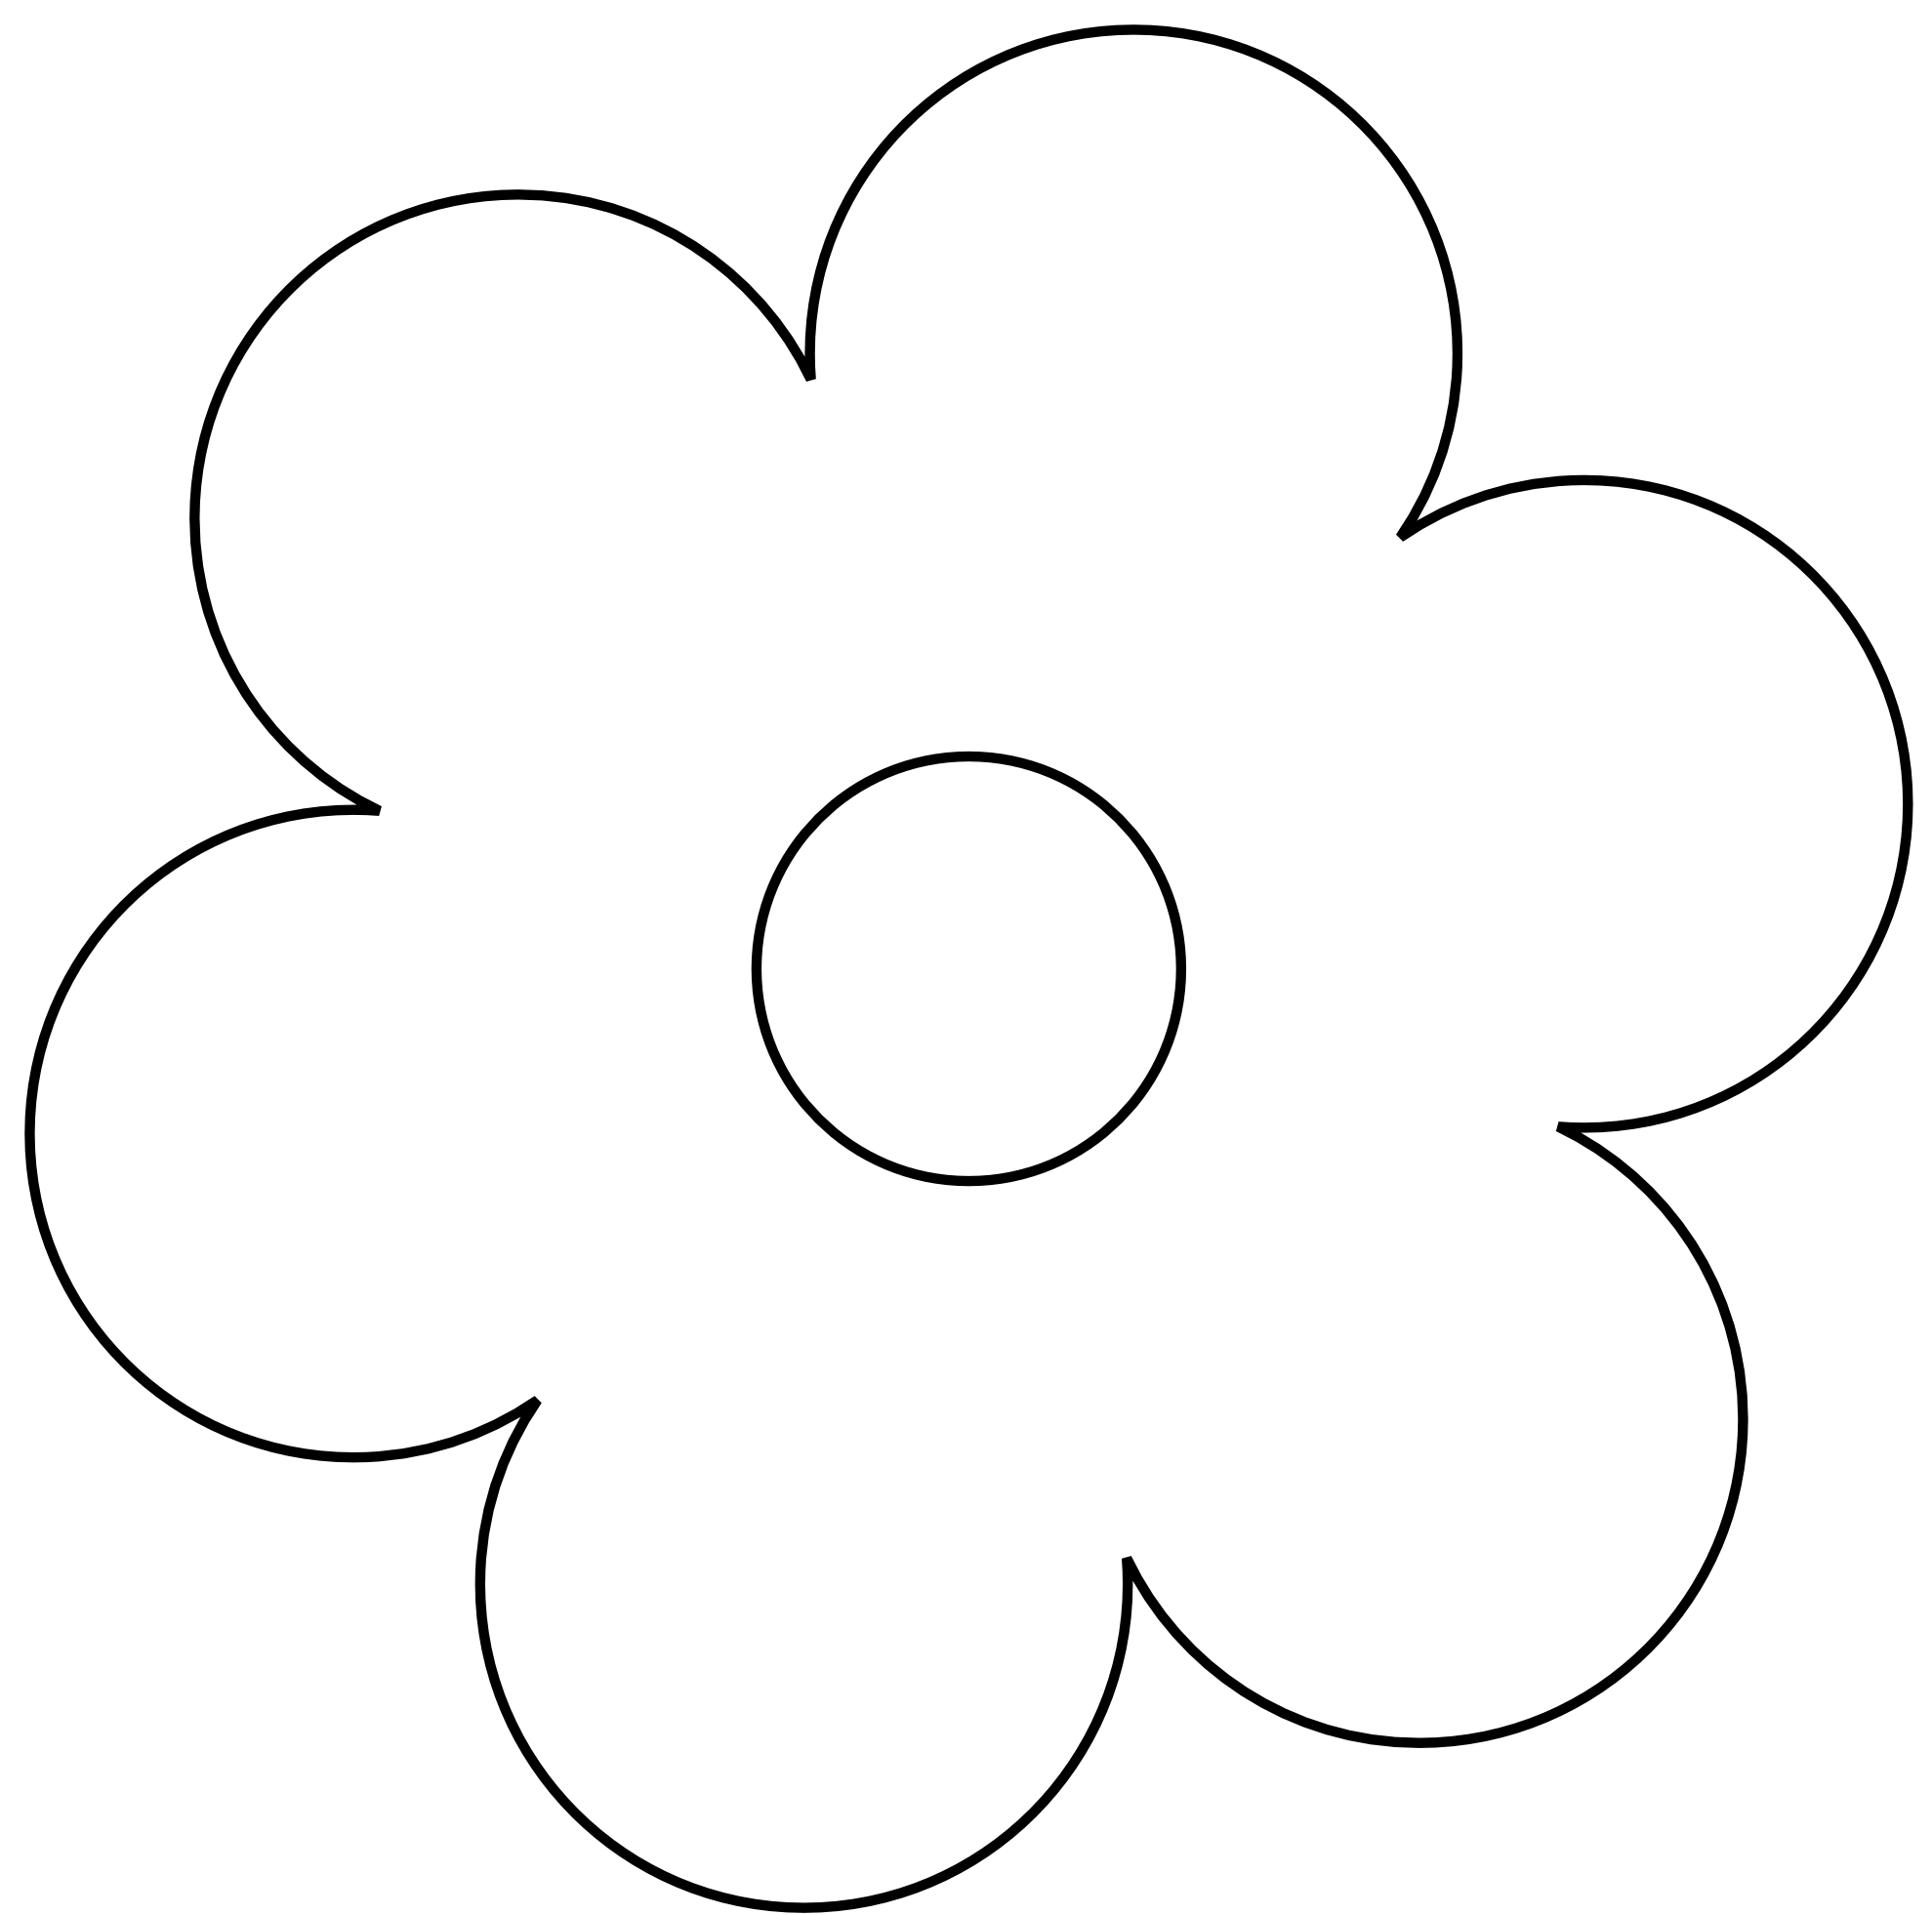 Free Clip Art Flowers Black And White - Cliparts.co